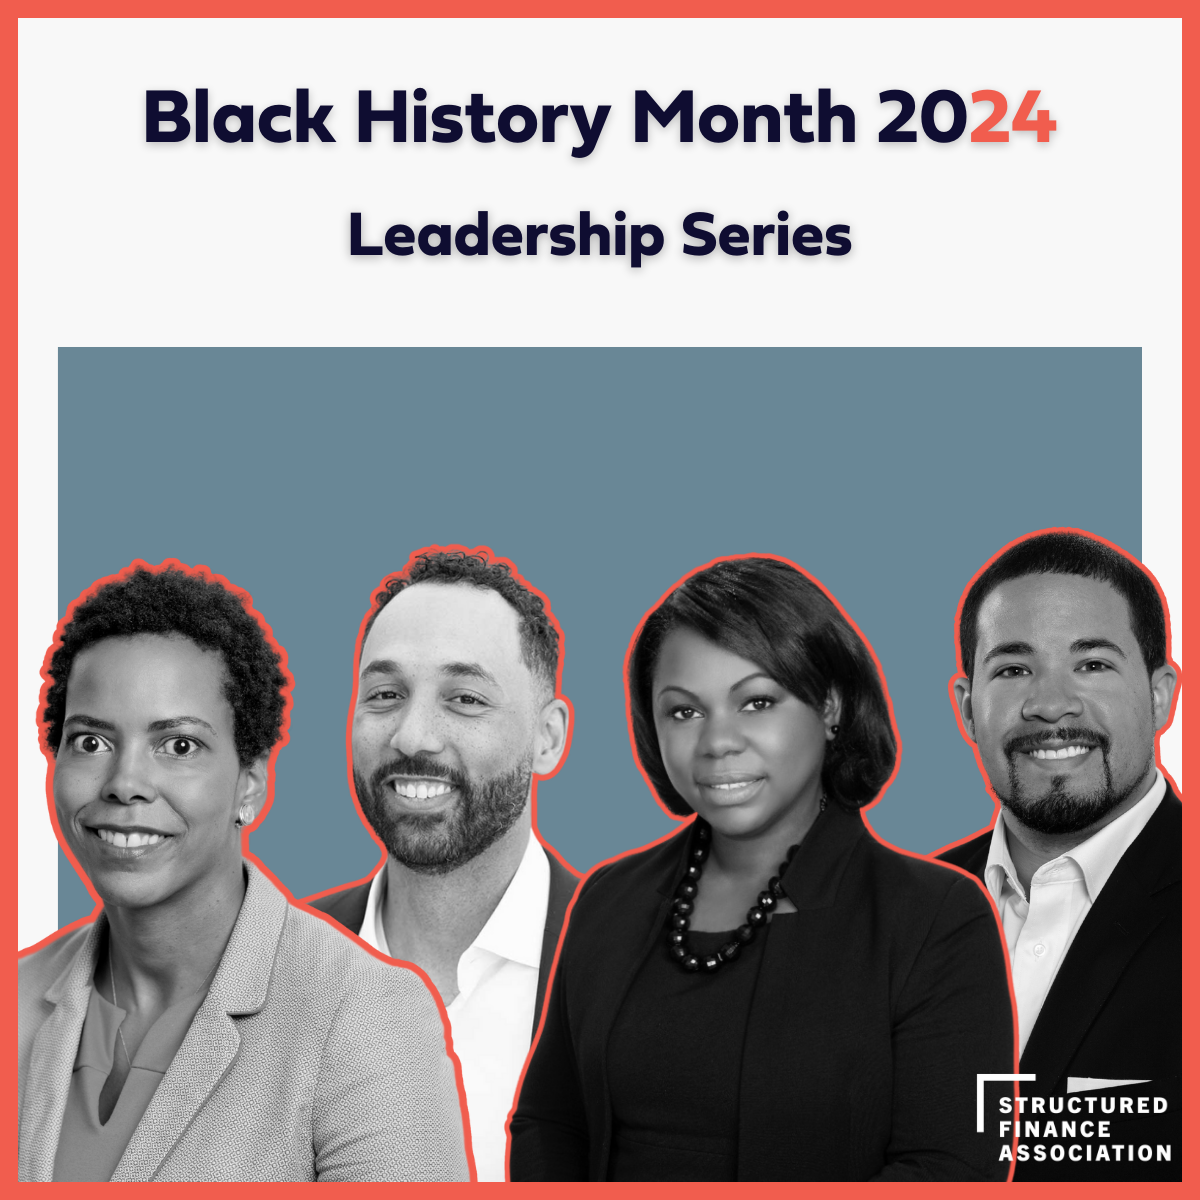 Black History Month Leadership Series 2024 Structured Finance Association